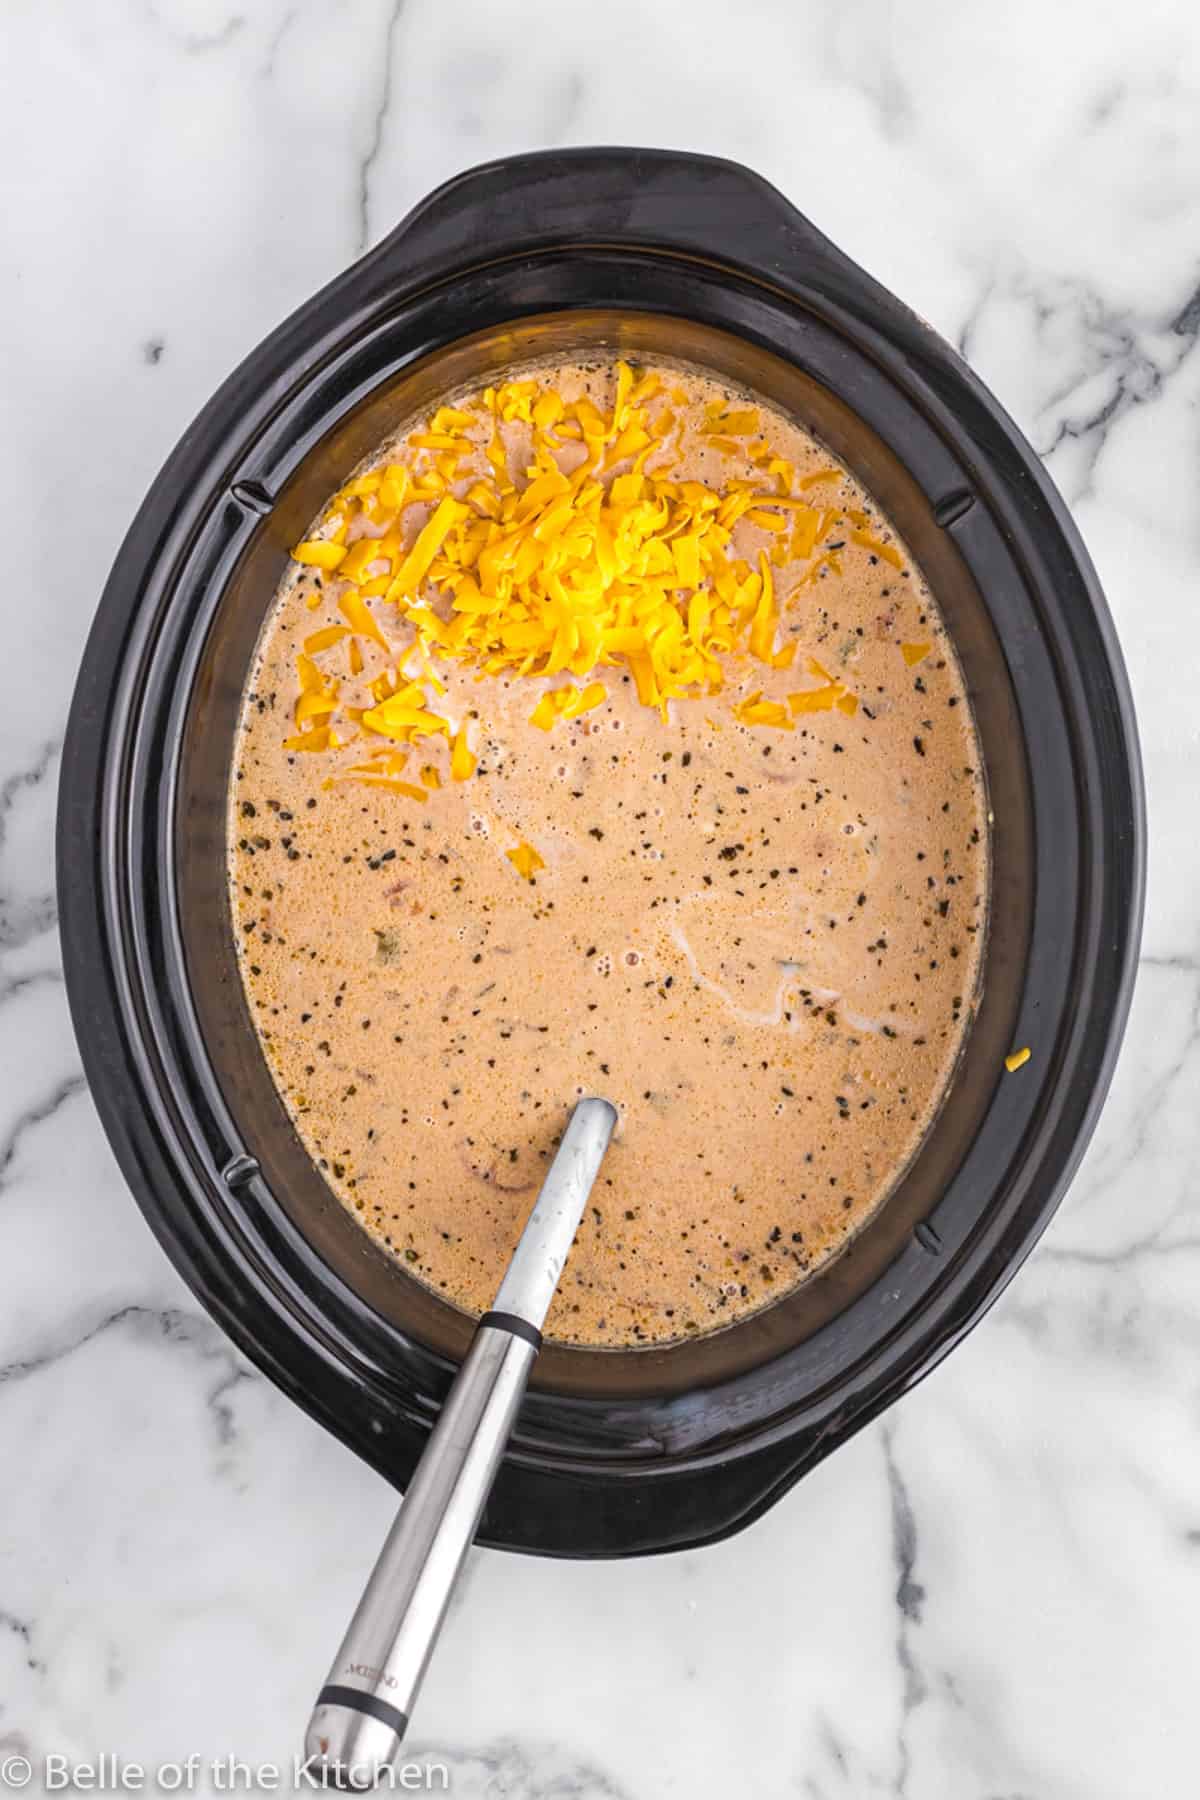 crockpot full of soup with cheese